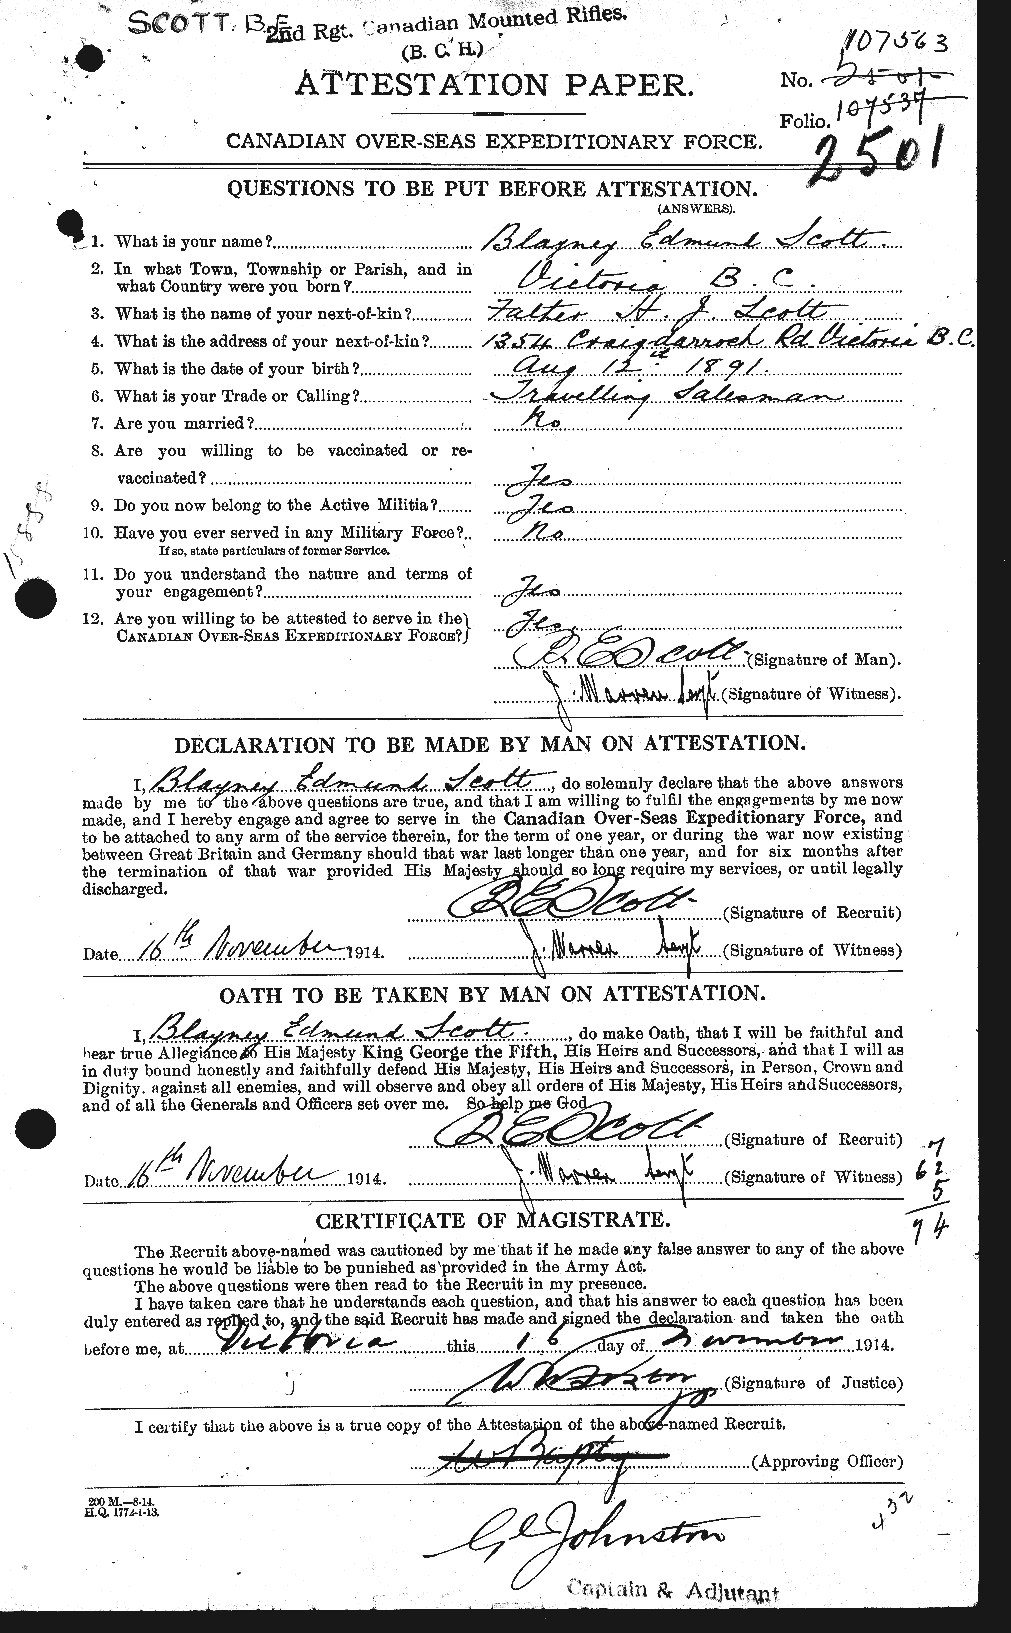 Personnel Records of the First World War - CEF 086212a